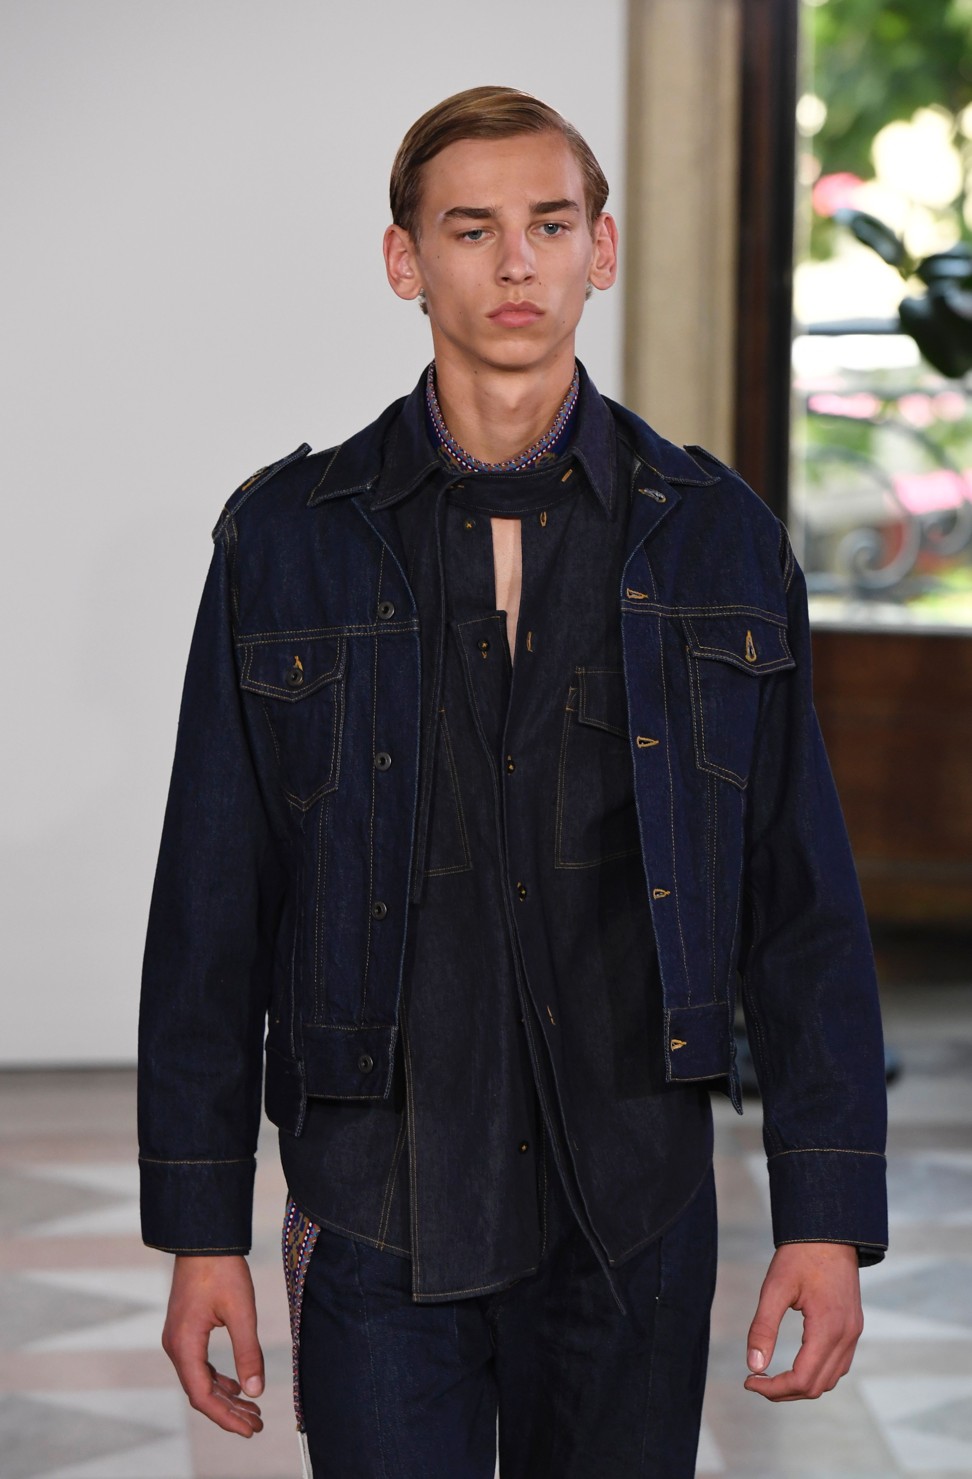 Valentino’s SS18 menswear collection focuses on sportswear | South ...